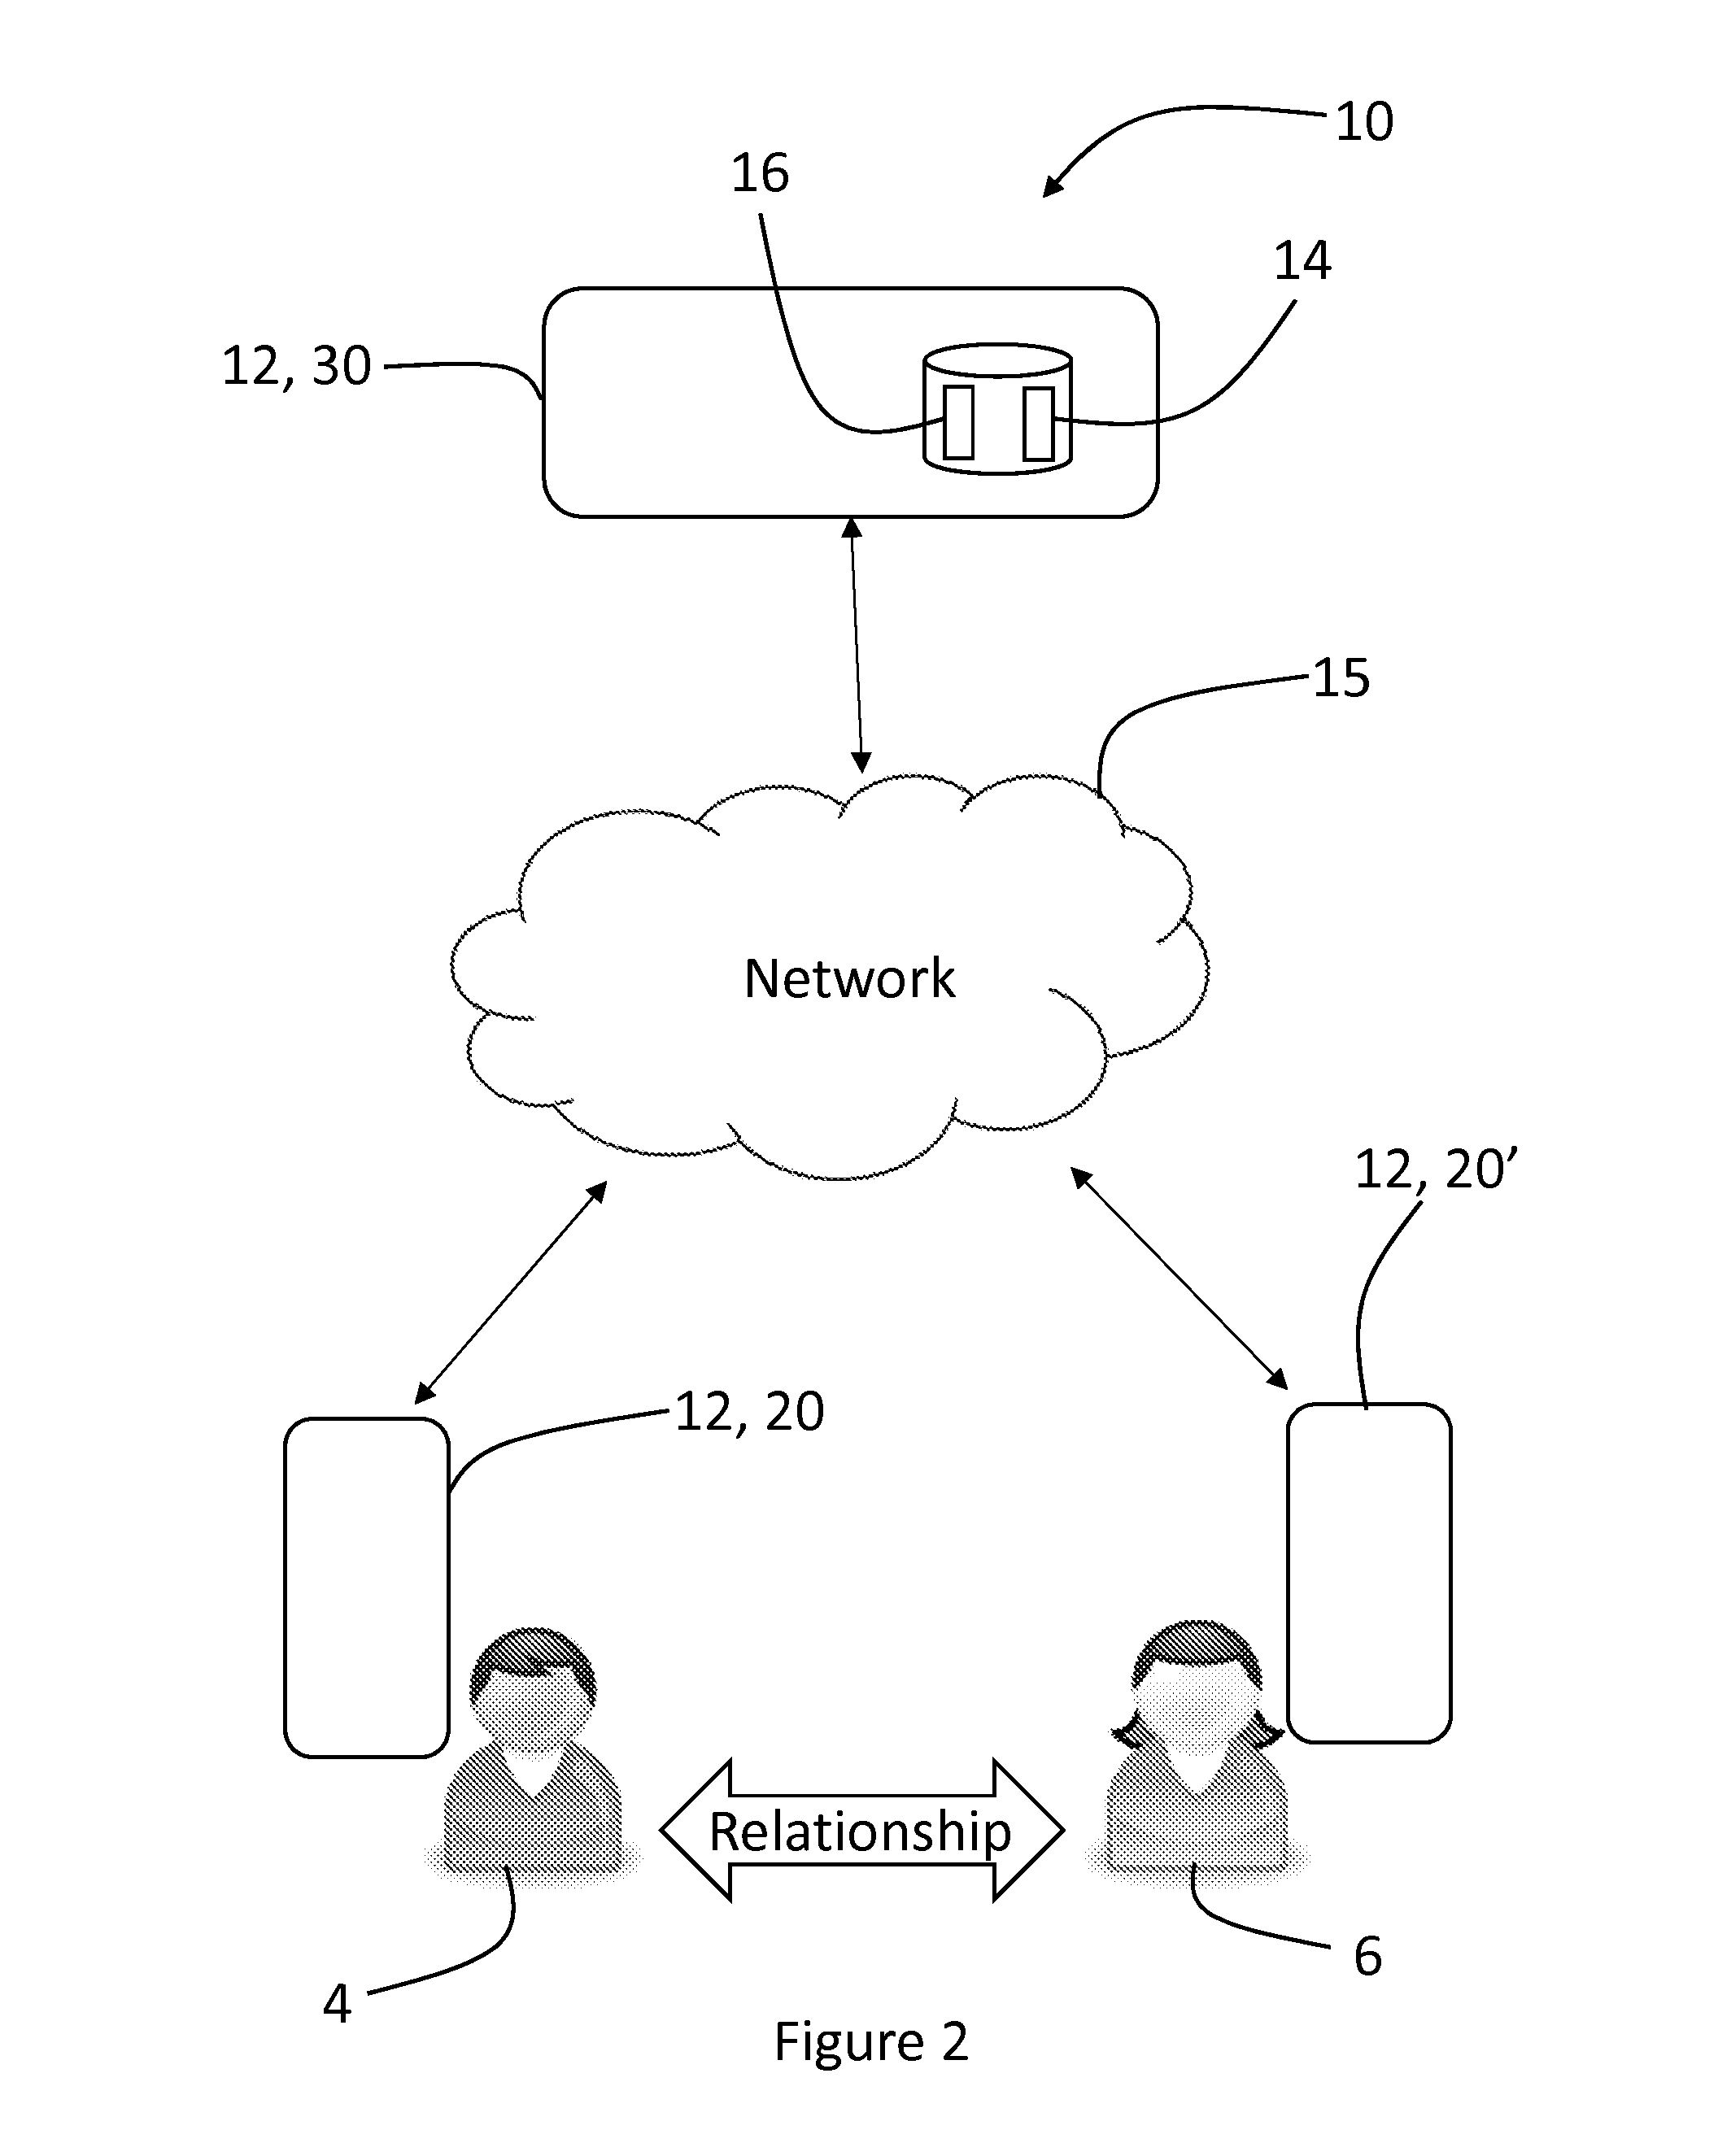 System and Method for Predicting and Communicating Data Relating to a Partner's Mood and Sensitivity